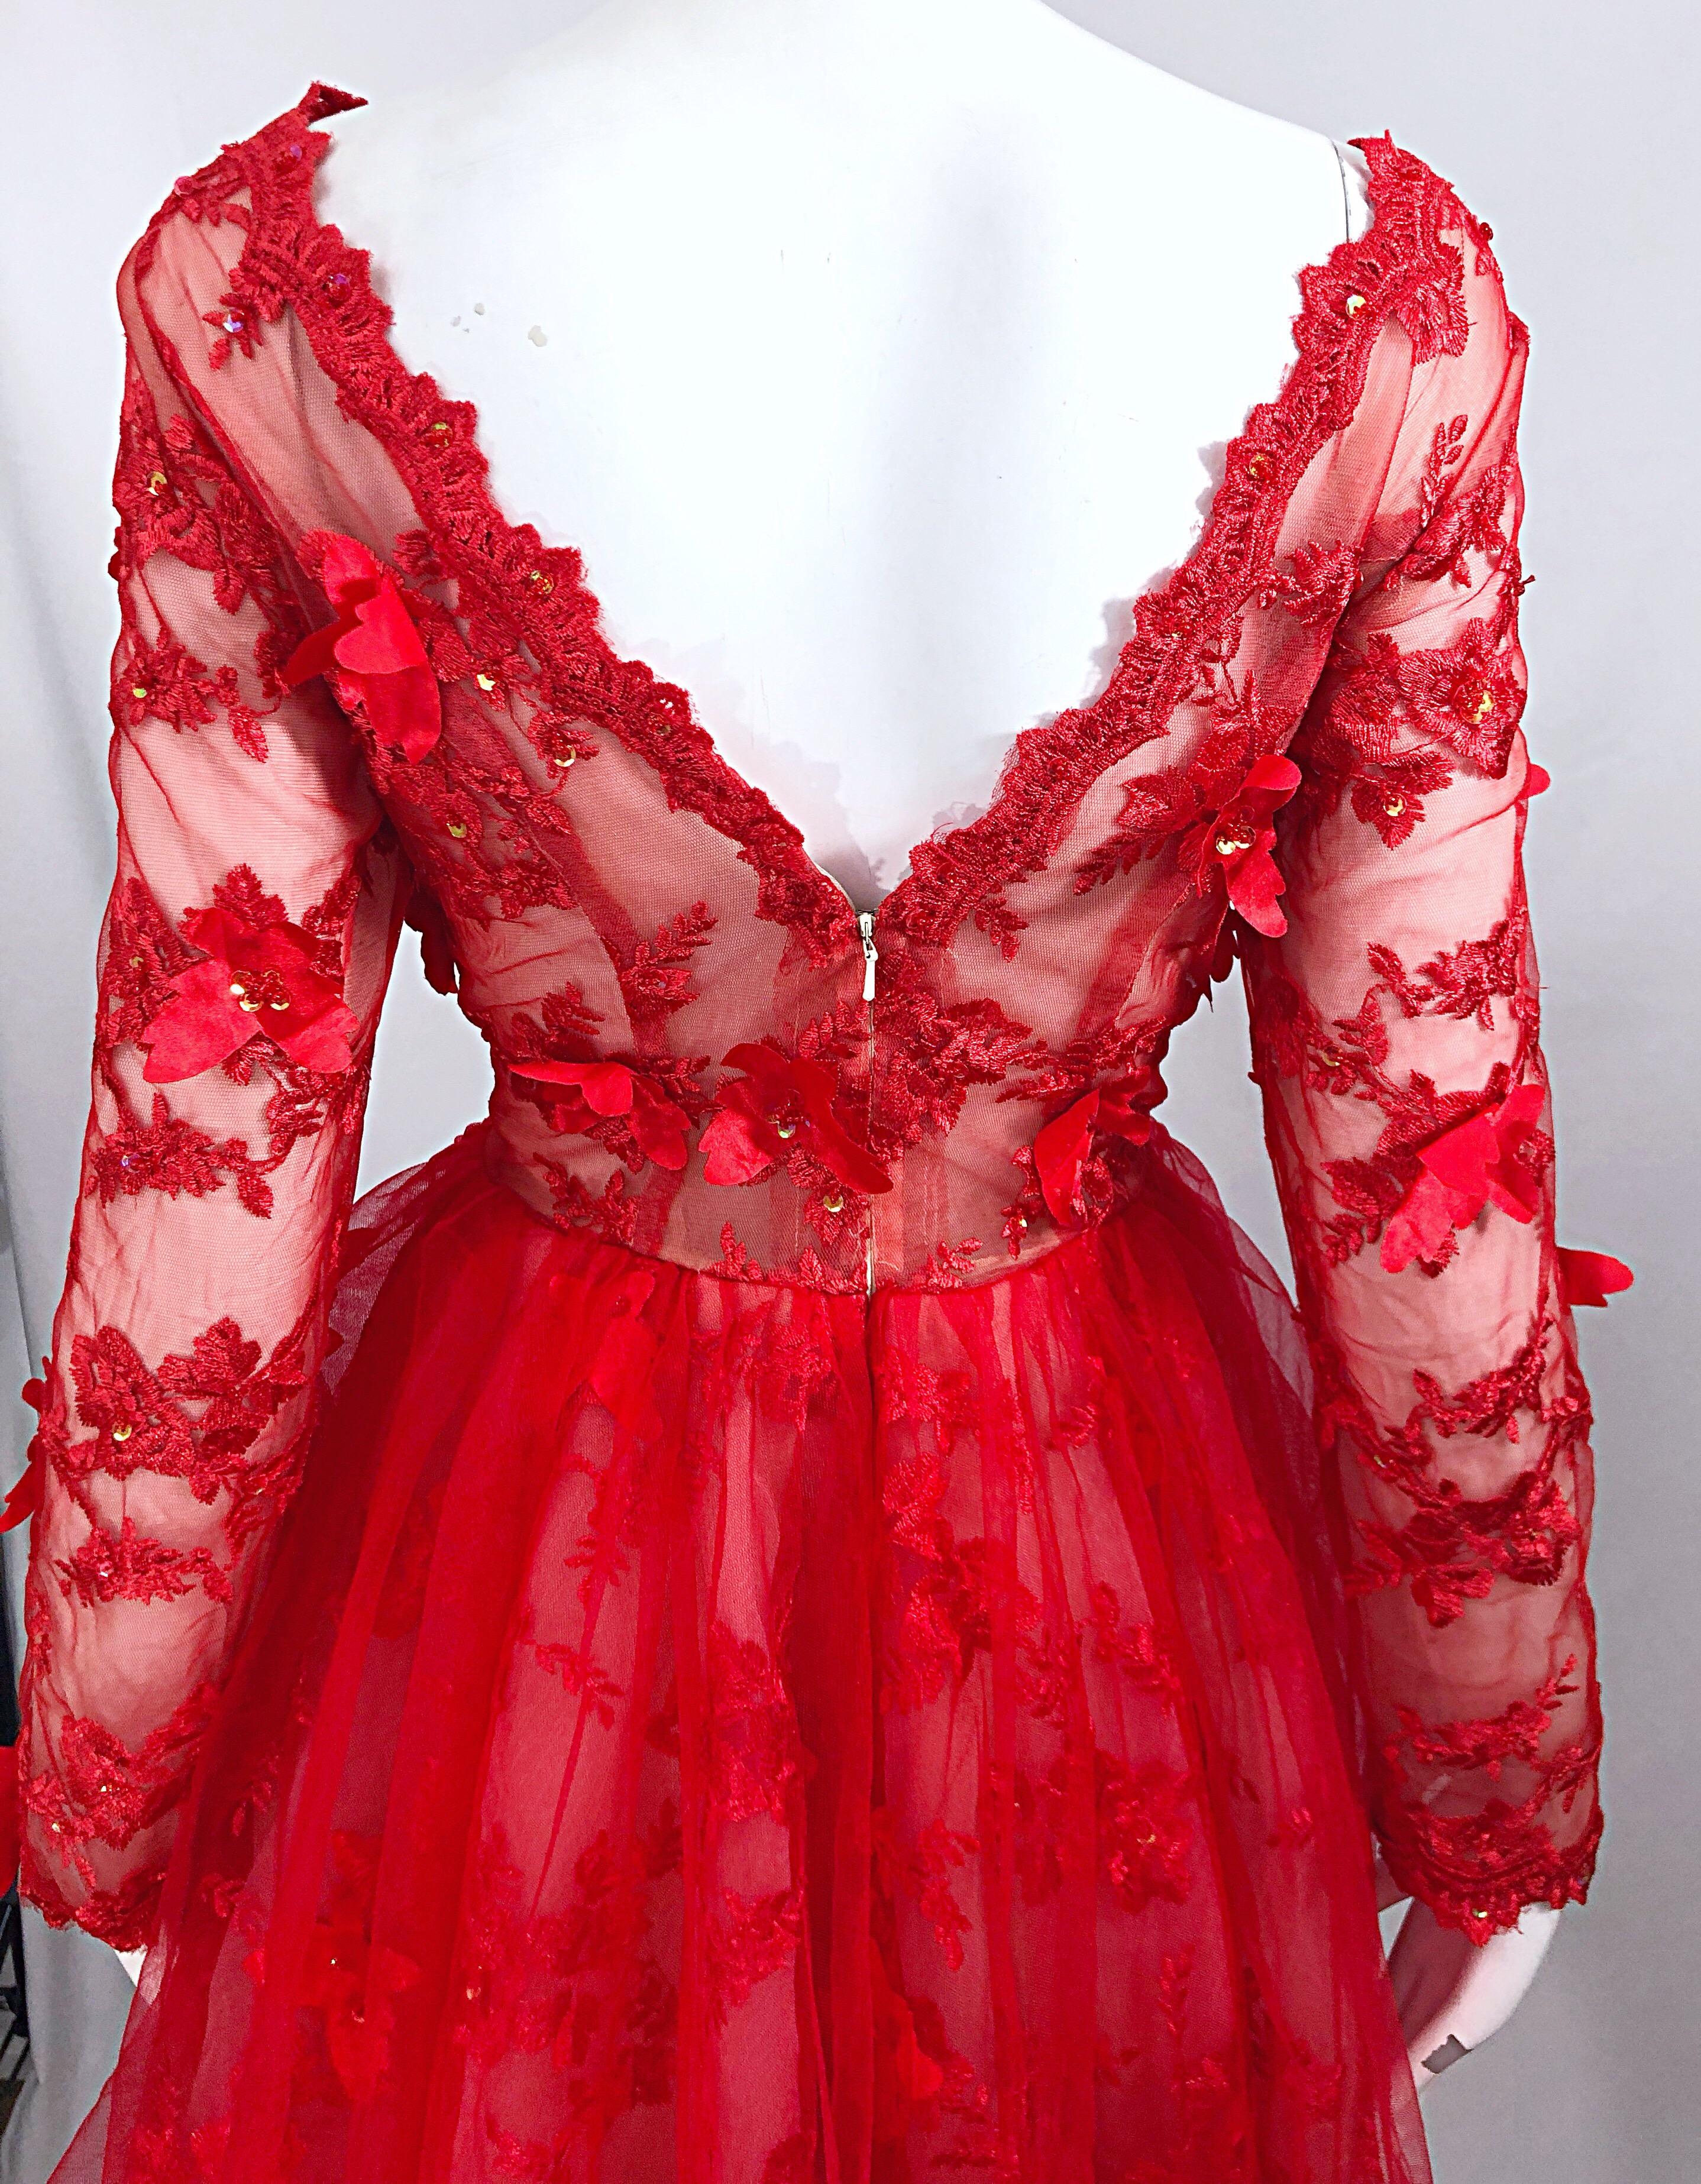 Vintage Couture 1990s Does 1950s Semi Sheer Sz 10 / 12 Lipstick Red Sequin Dress 1